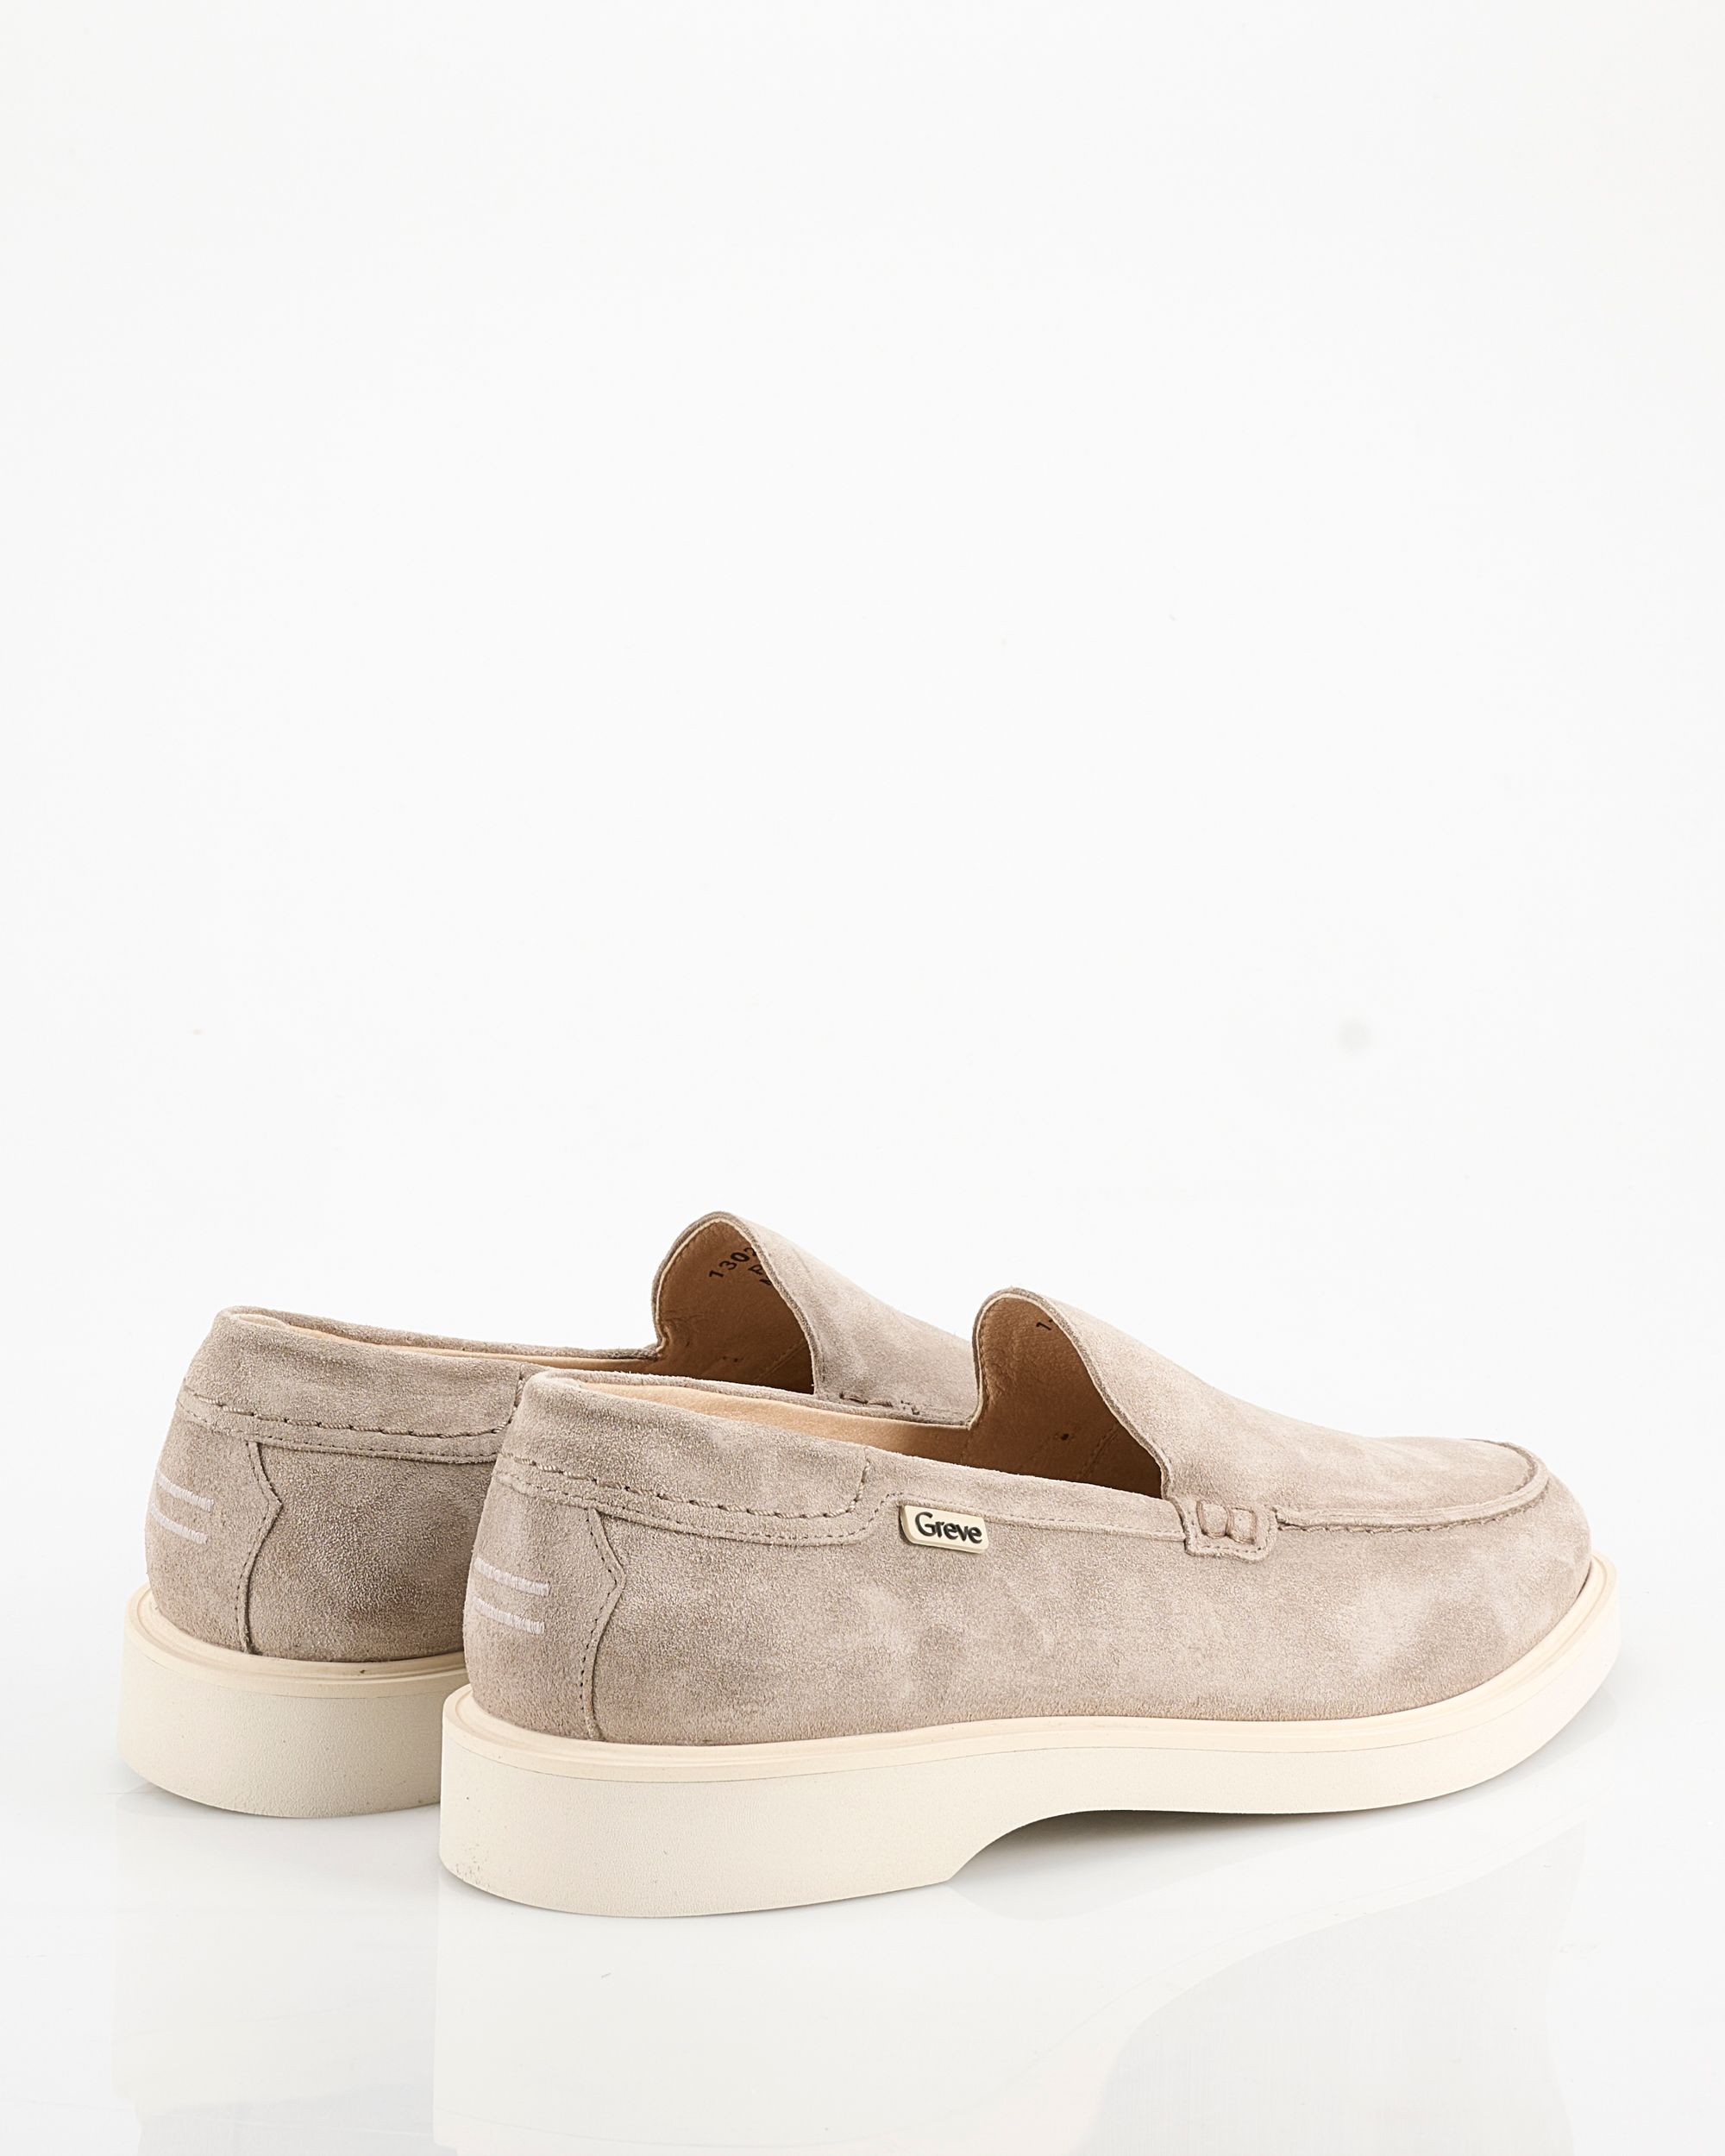 Greve Vito Loafers Beige 092115-001-41